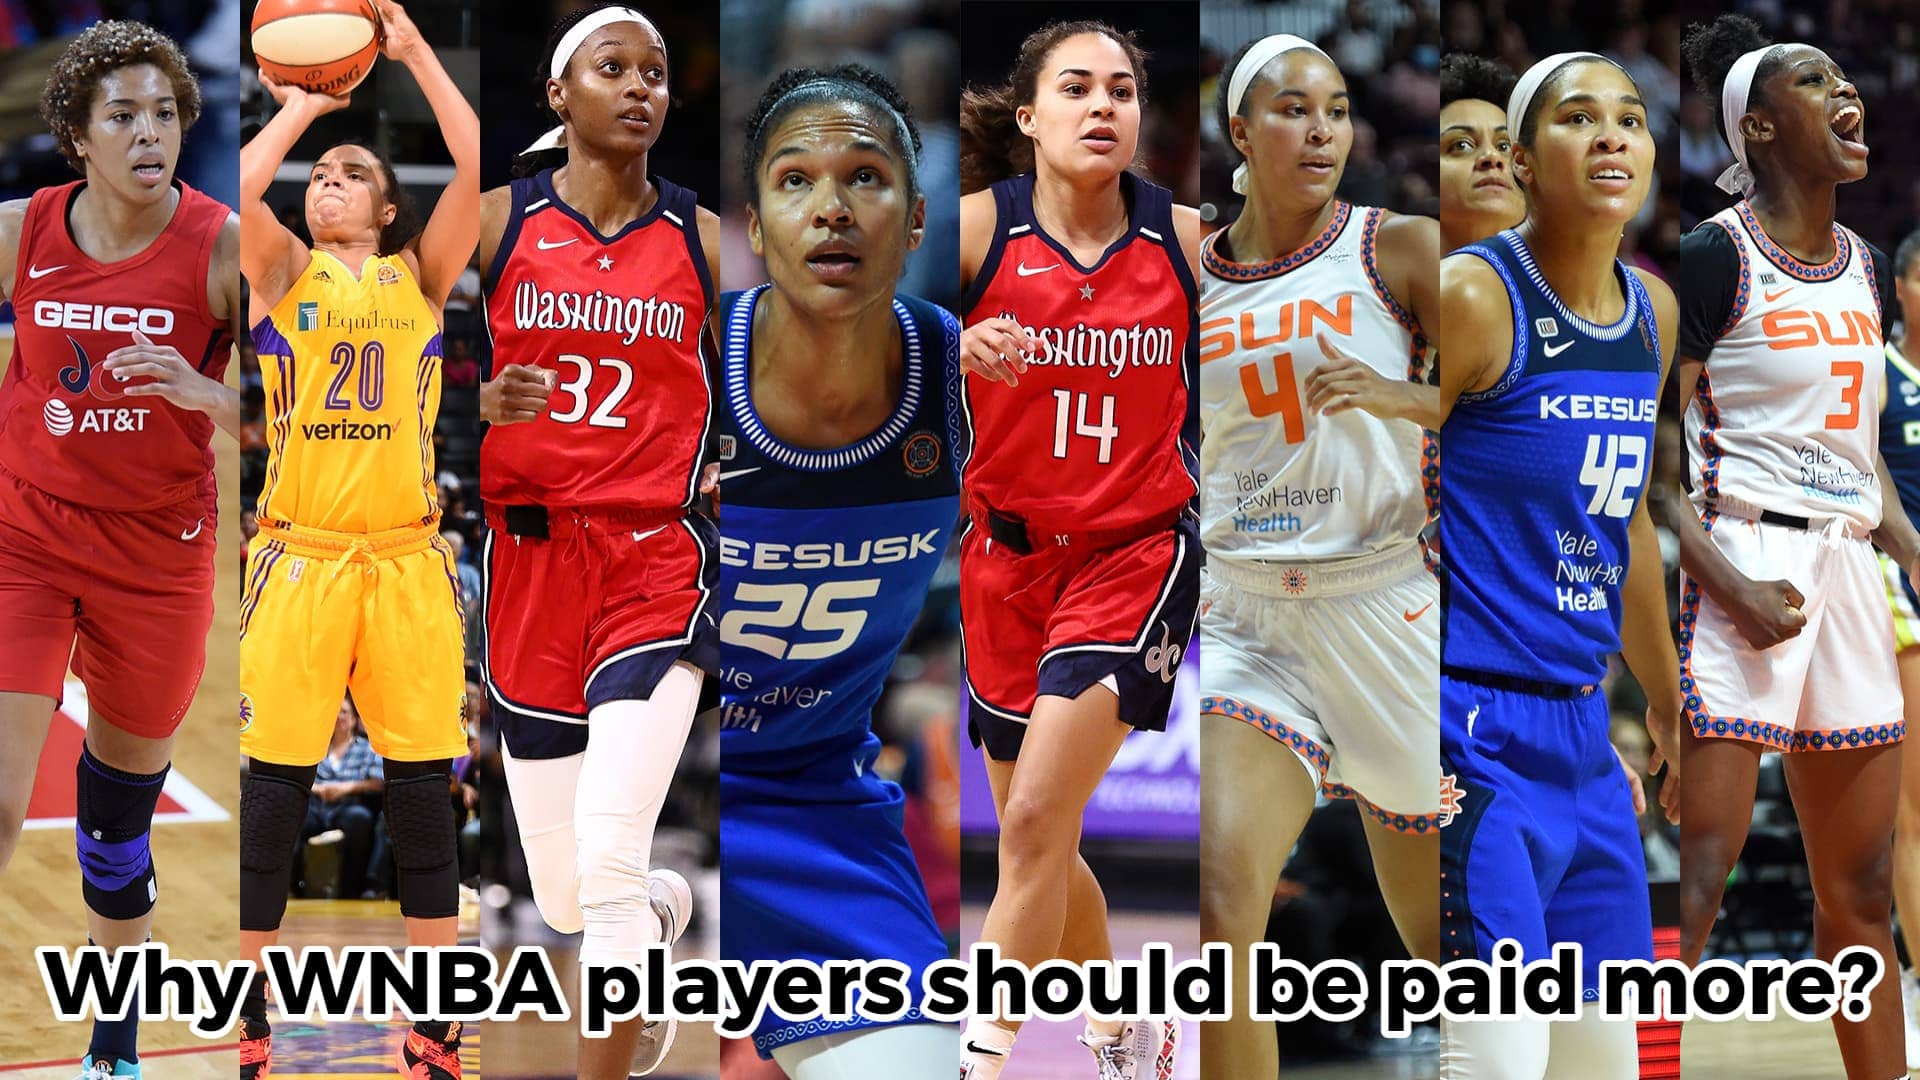 Why WNBA players should be paid more: Does WNBA pay well?